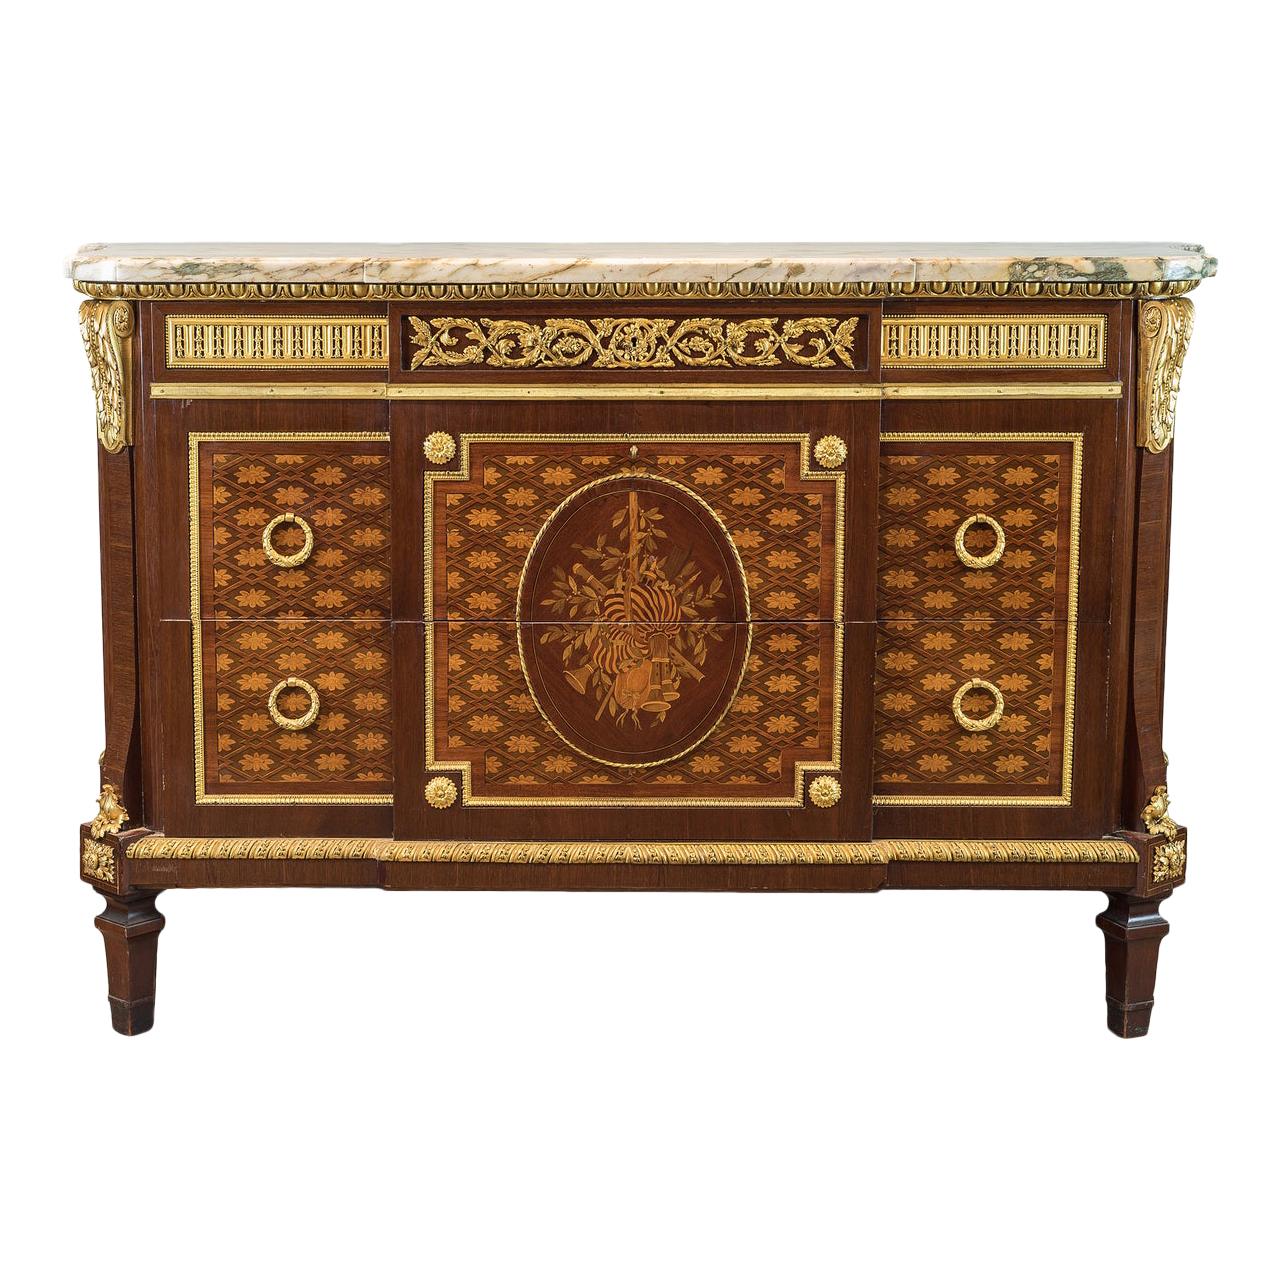 Ormolu-Mounted Parquetry, Marquetry Mahogany Marble-Top Commode